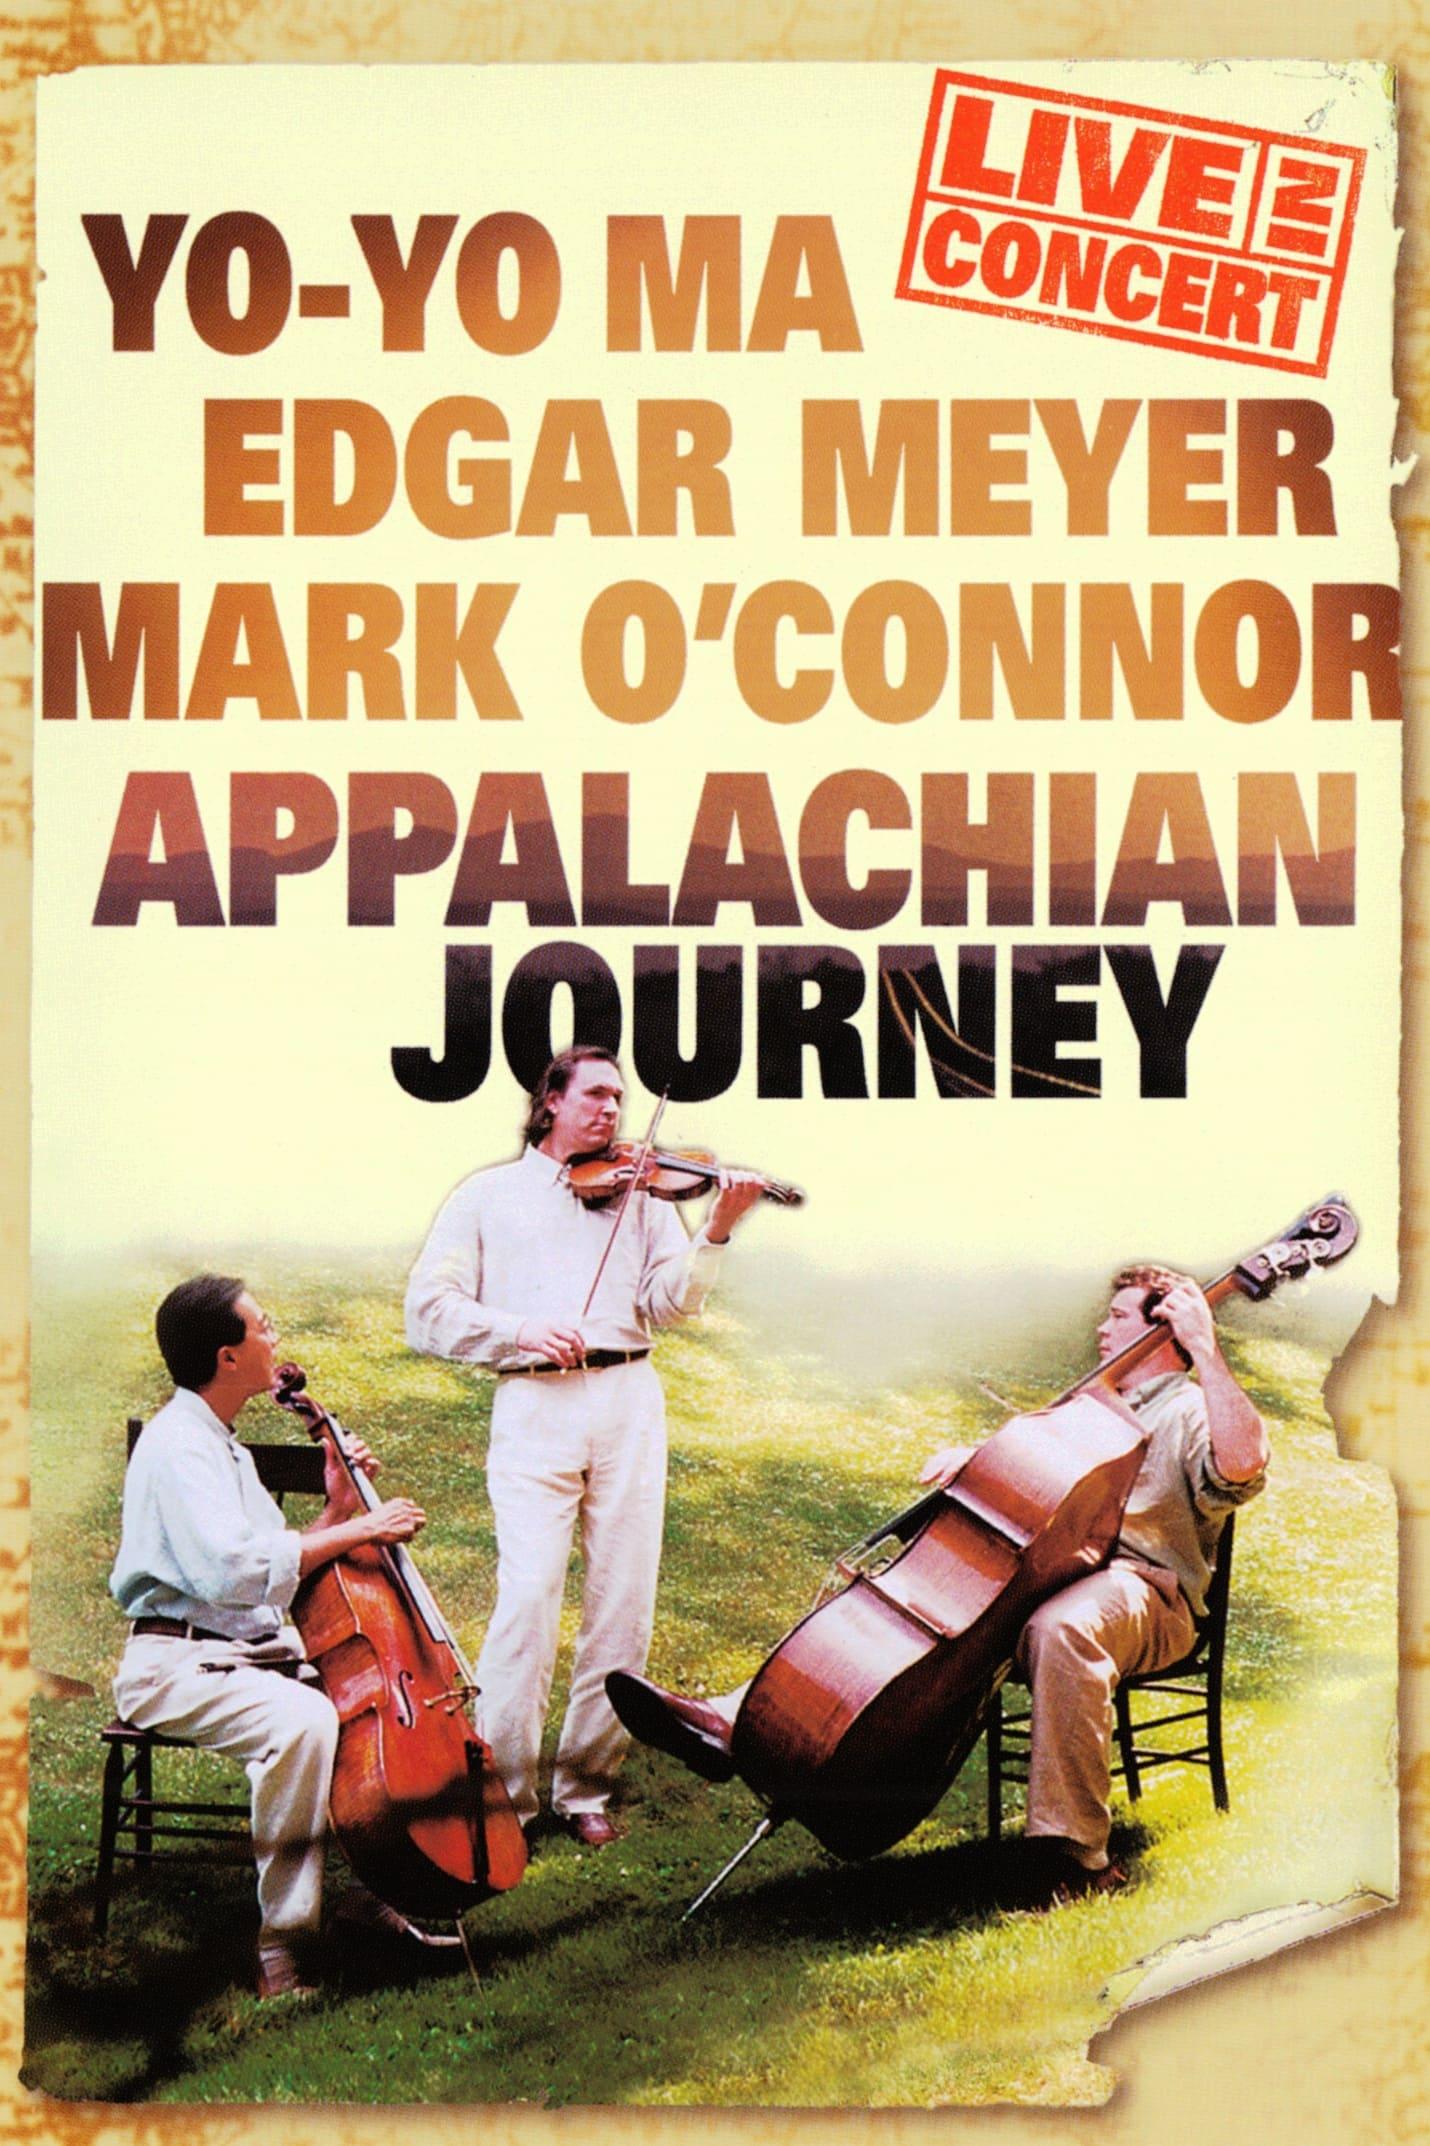 Appalachian Journey Live In Concert poster